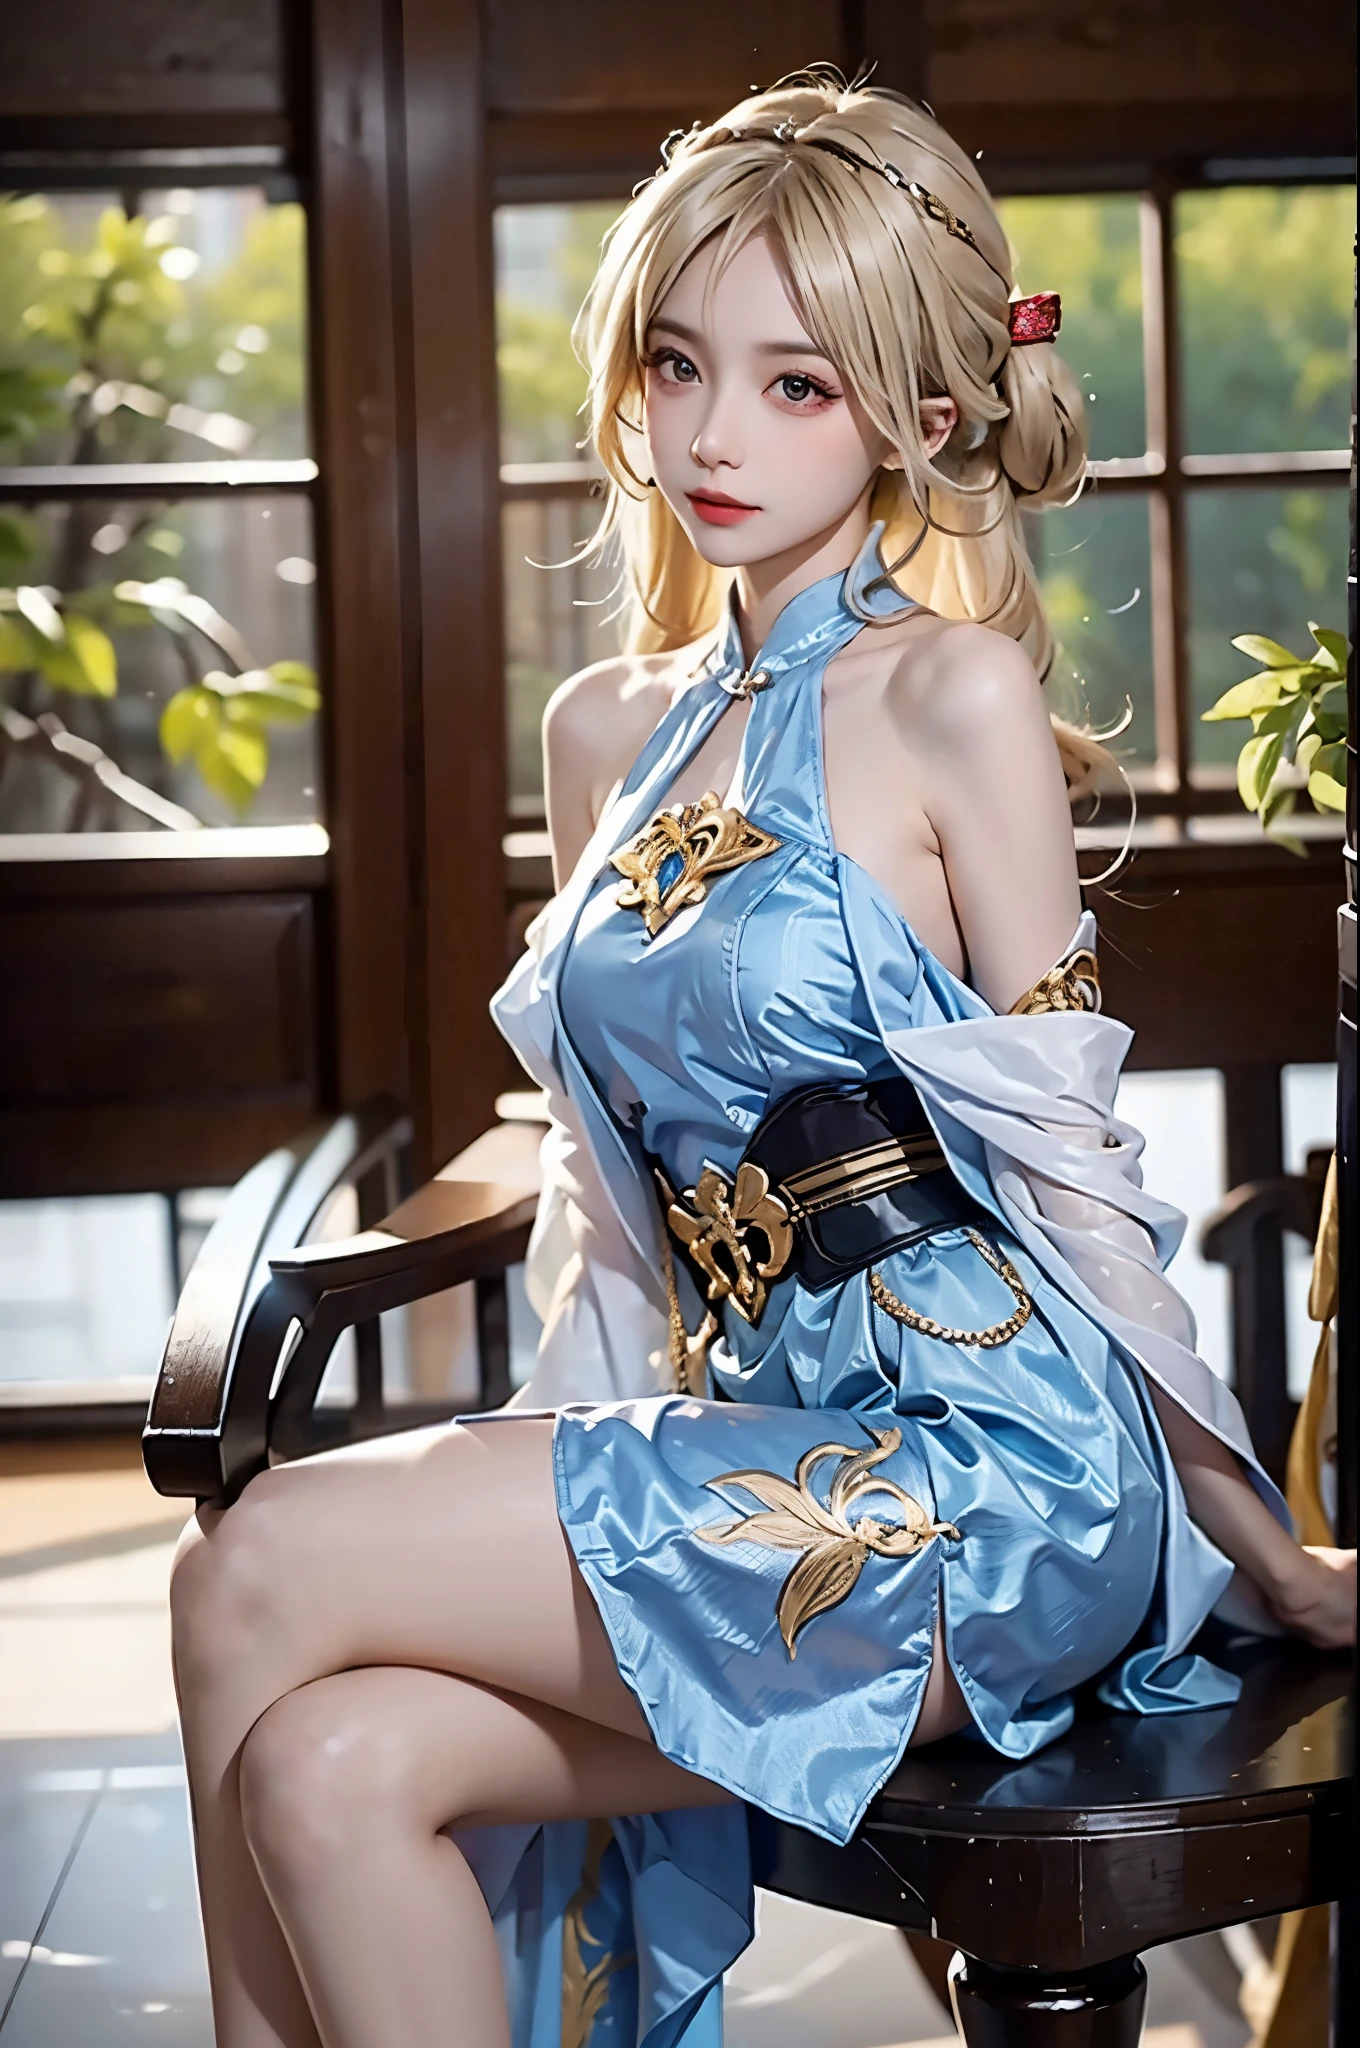 yinziping,china dress, ((full body)), Shot from random angles, 22-year-old Japanese model, Slim, thin waist, curls, Jie Kang , ((bare shoulders)), ((The skirt is short)), high waist, nice belt, blond hair, warm light, Warm toned slender legs, cross legs, in the classroom, sitting on the table in the classroom, warm light, warm color palette, dynamic poses, pose elegantly, blonde hair, striped hair, hair accessories, heart shaped pupils, cosmetic, faint smile, Shy, lick lips, romanticism, Social realism, chiaroscuro, motion blur, relief, Sony FE General Manager, ultra high definition, masterpiece, textured skin, Super details, best quality